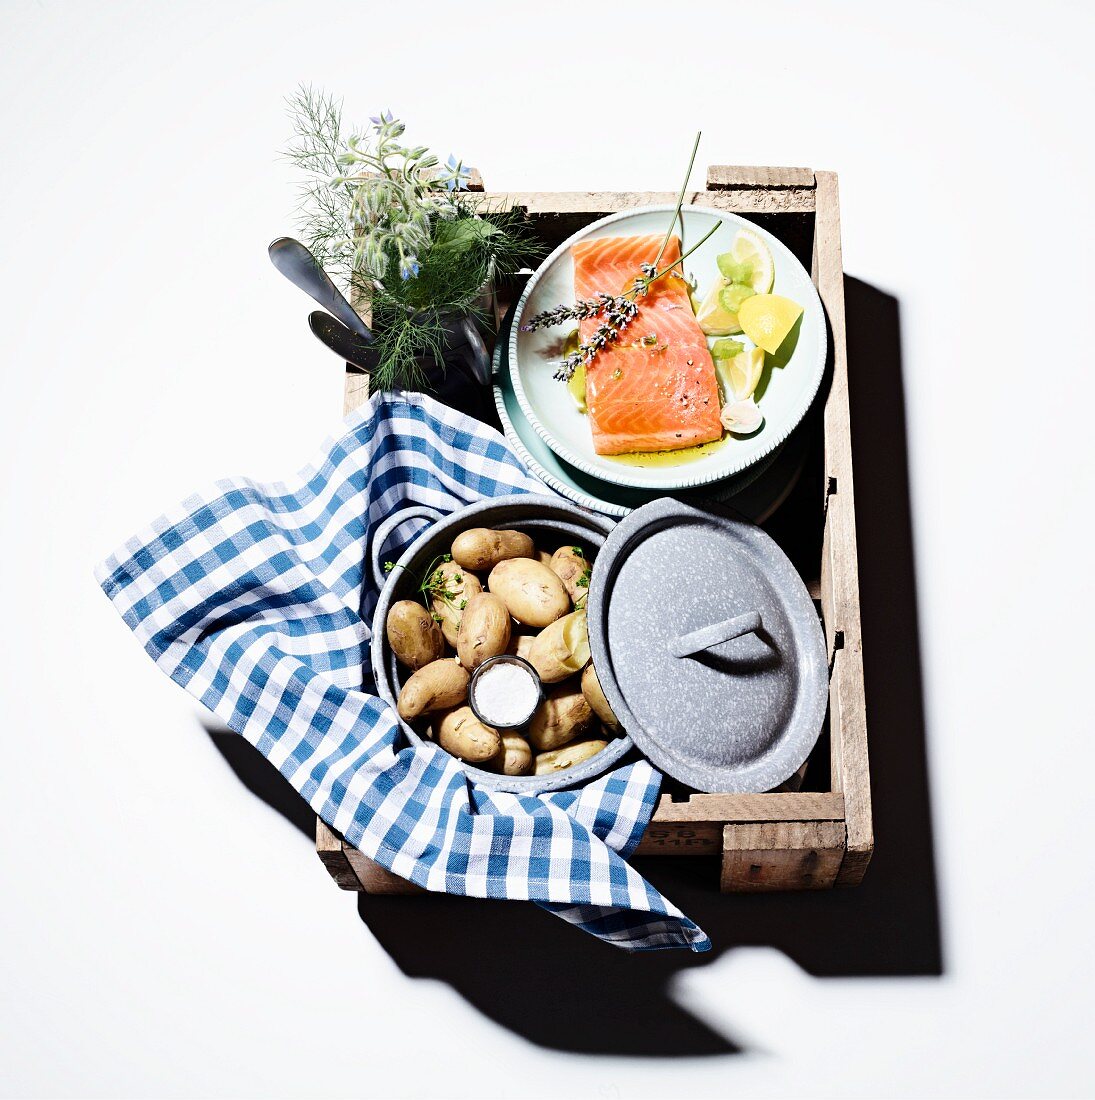 Marinated salmon and new potatoes in a picnic basket